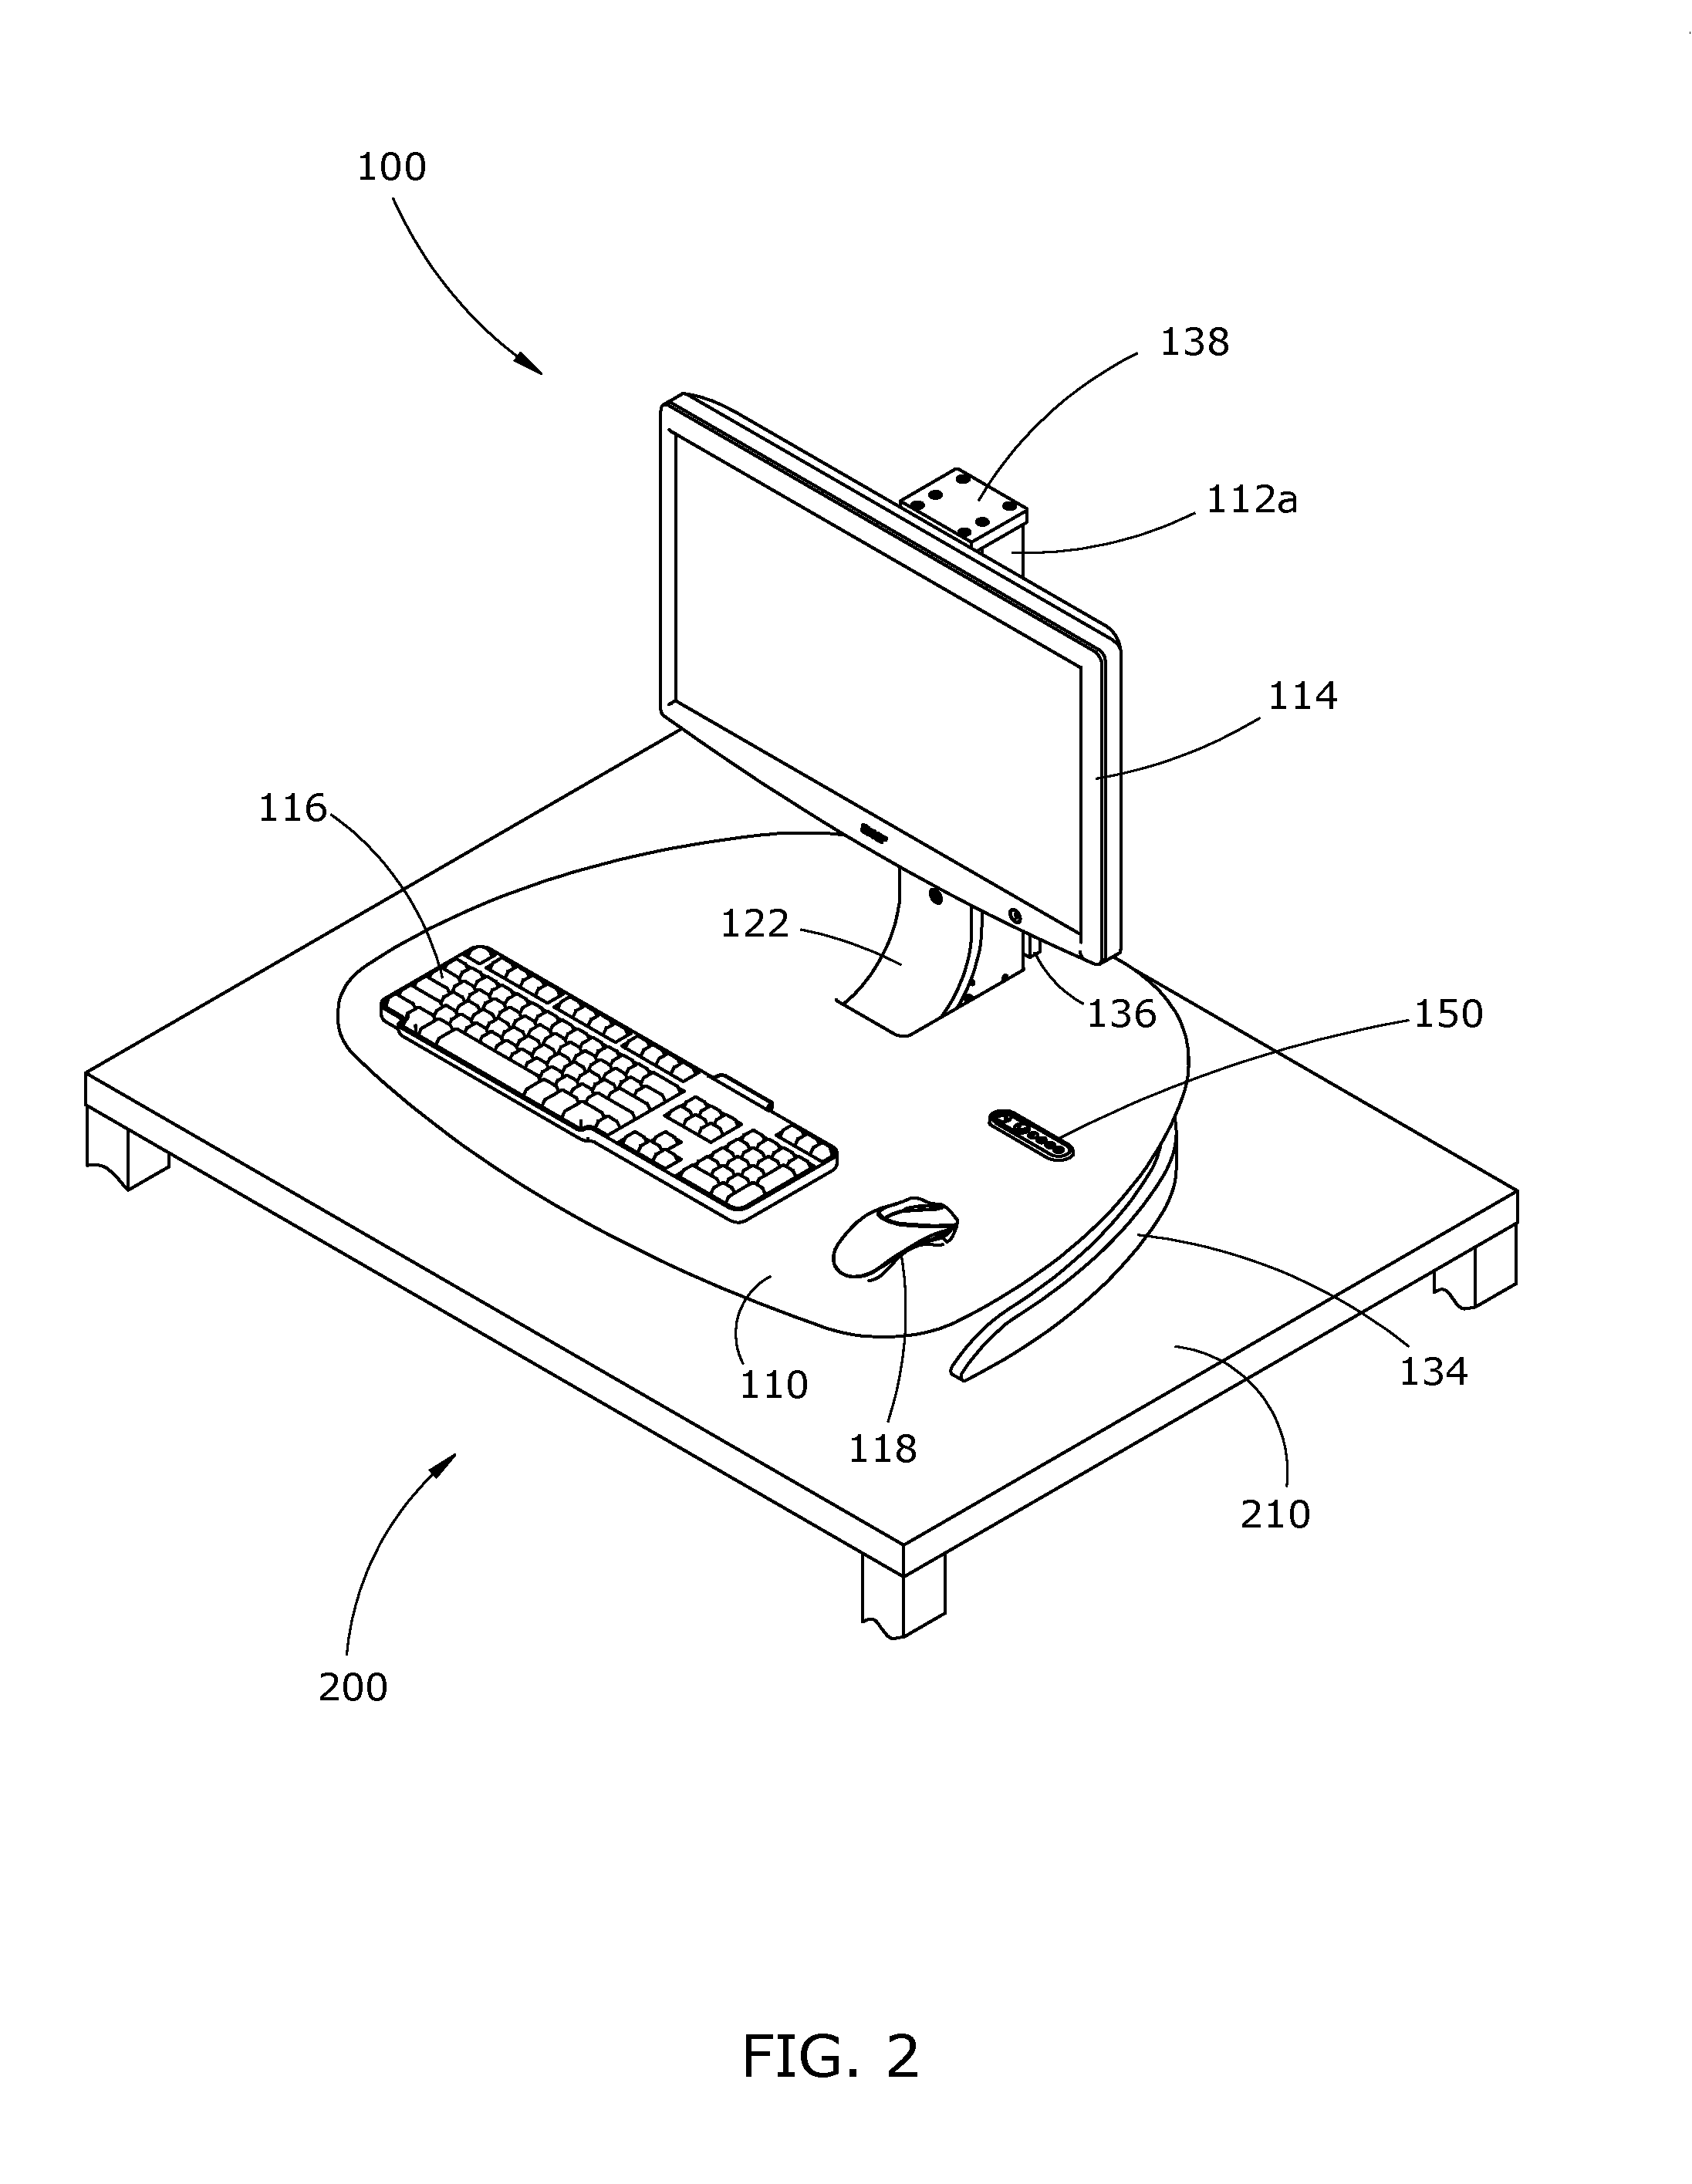 Electric height adjustable platform for computer keyboard and monitor